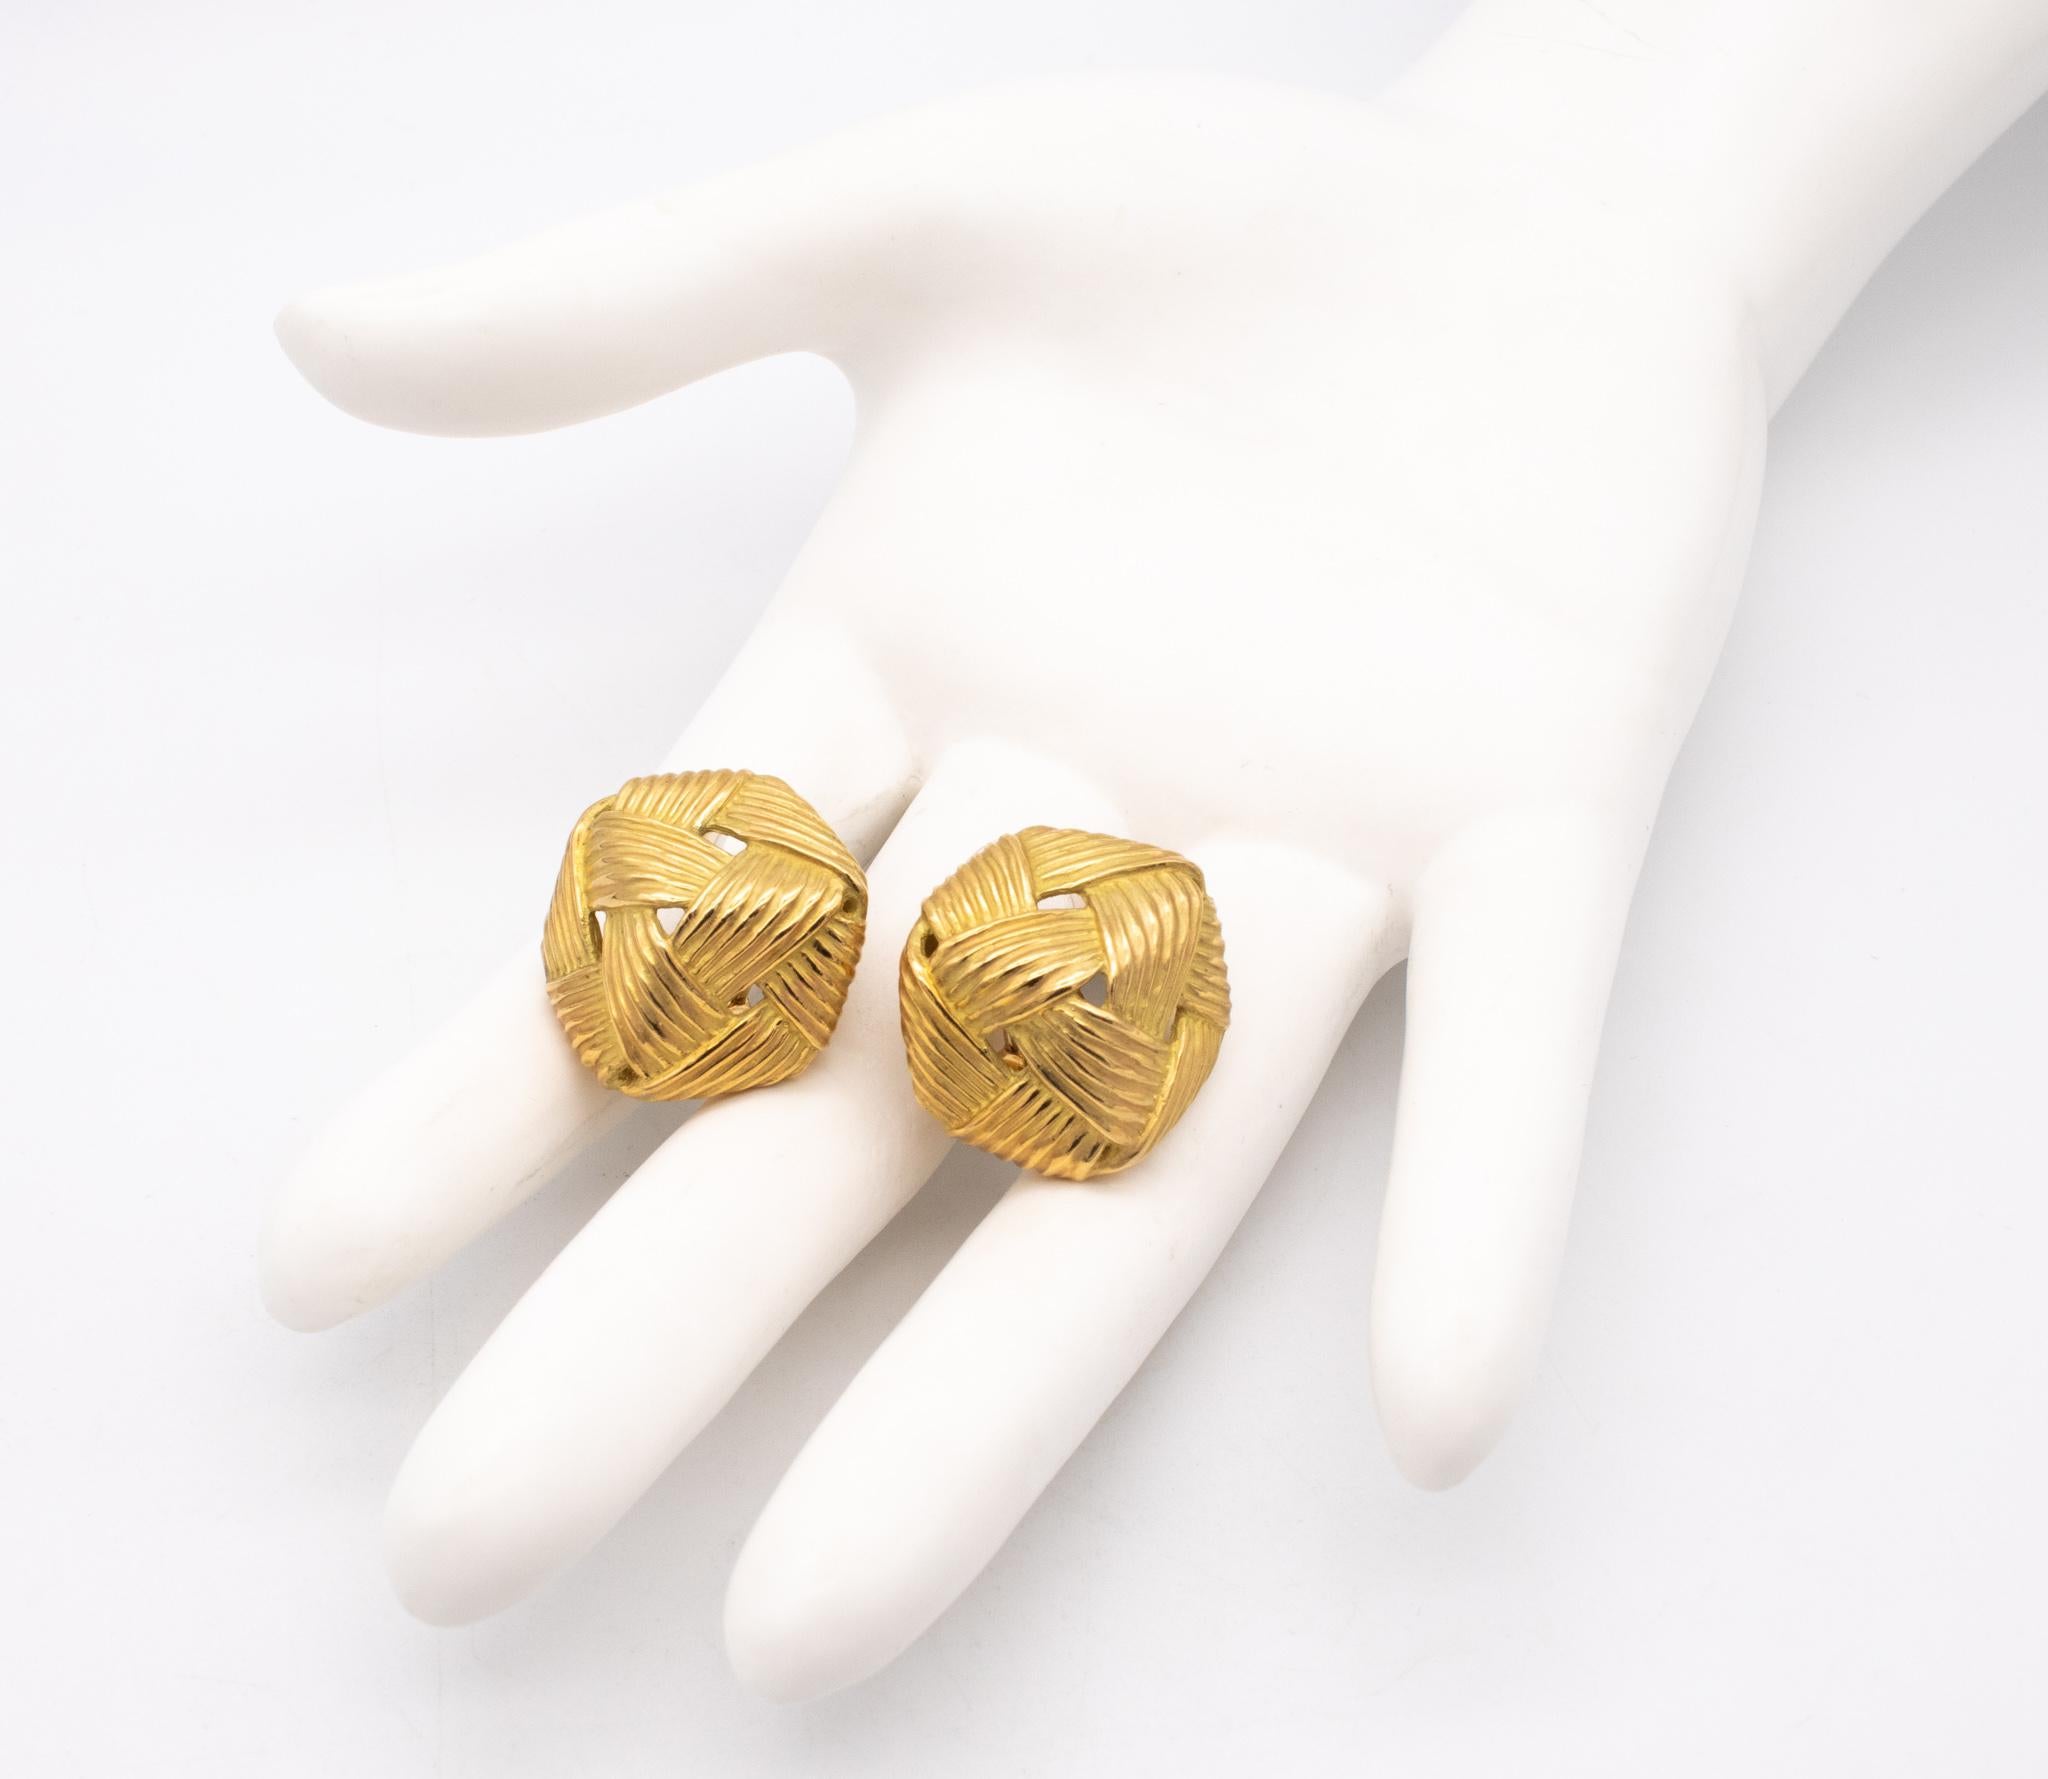 Modernist Angela Cummings 1984 Studio Textured Wrapped Earrings in Solid 18Kt Yellow Gold For Sale